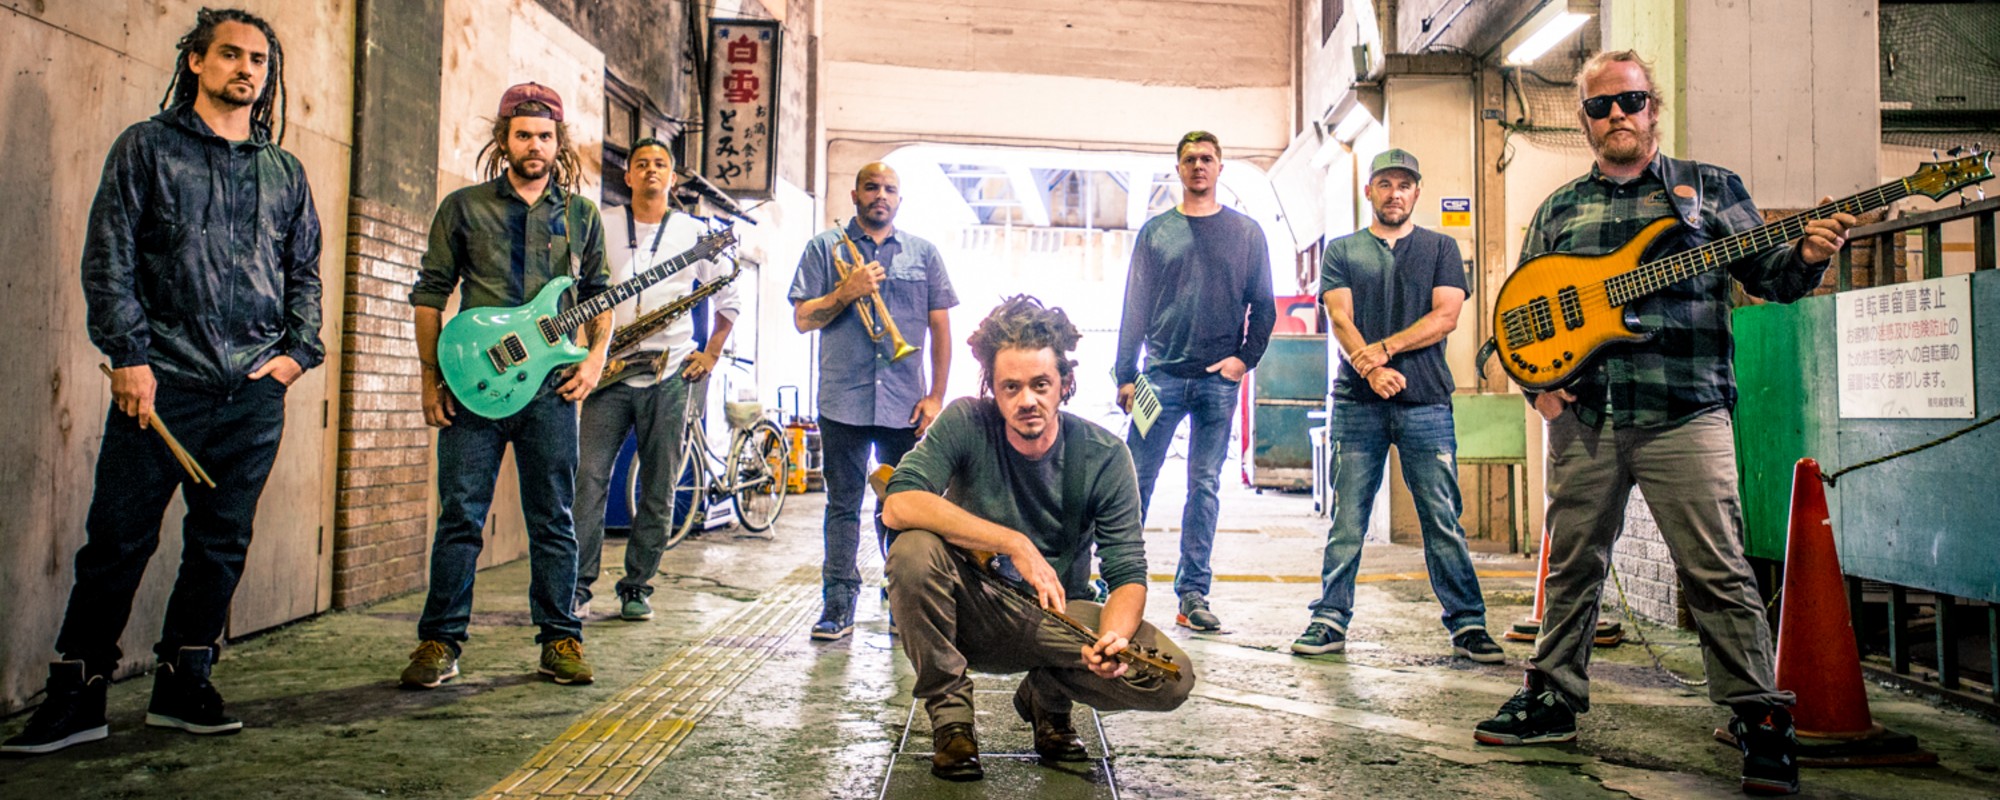 SOJA Explores A Wrecking Ball Relationship With “The Day You Came,” Featuring UB40 & Rebelution